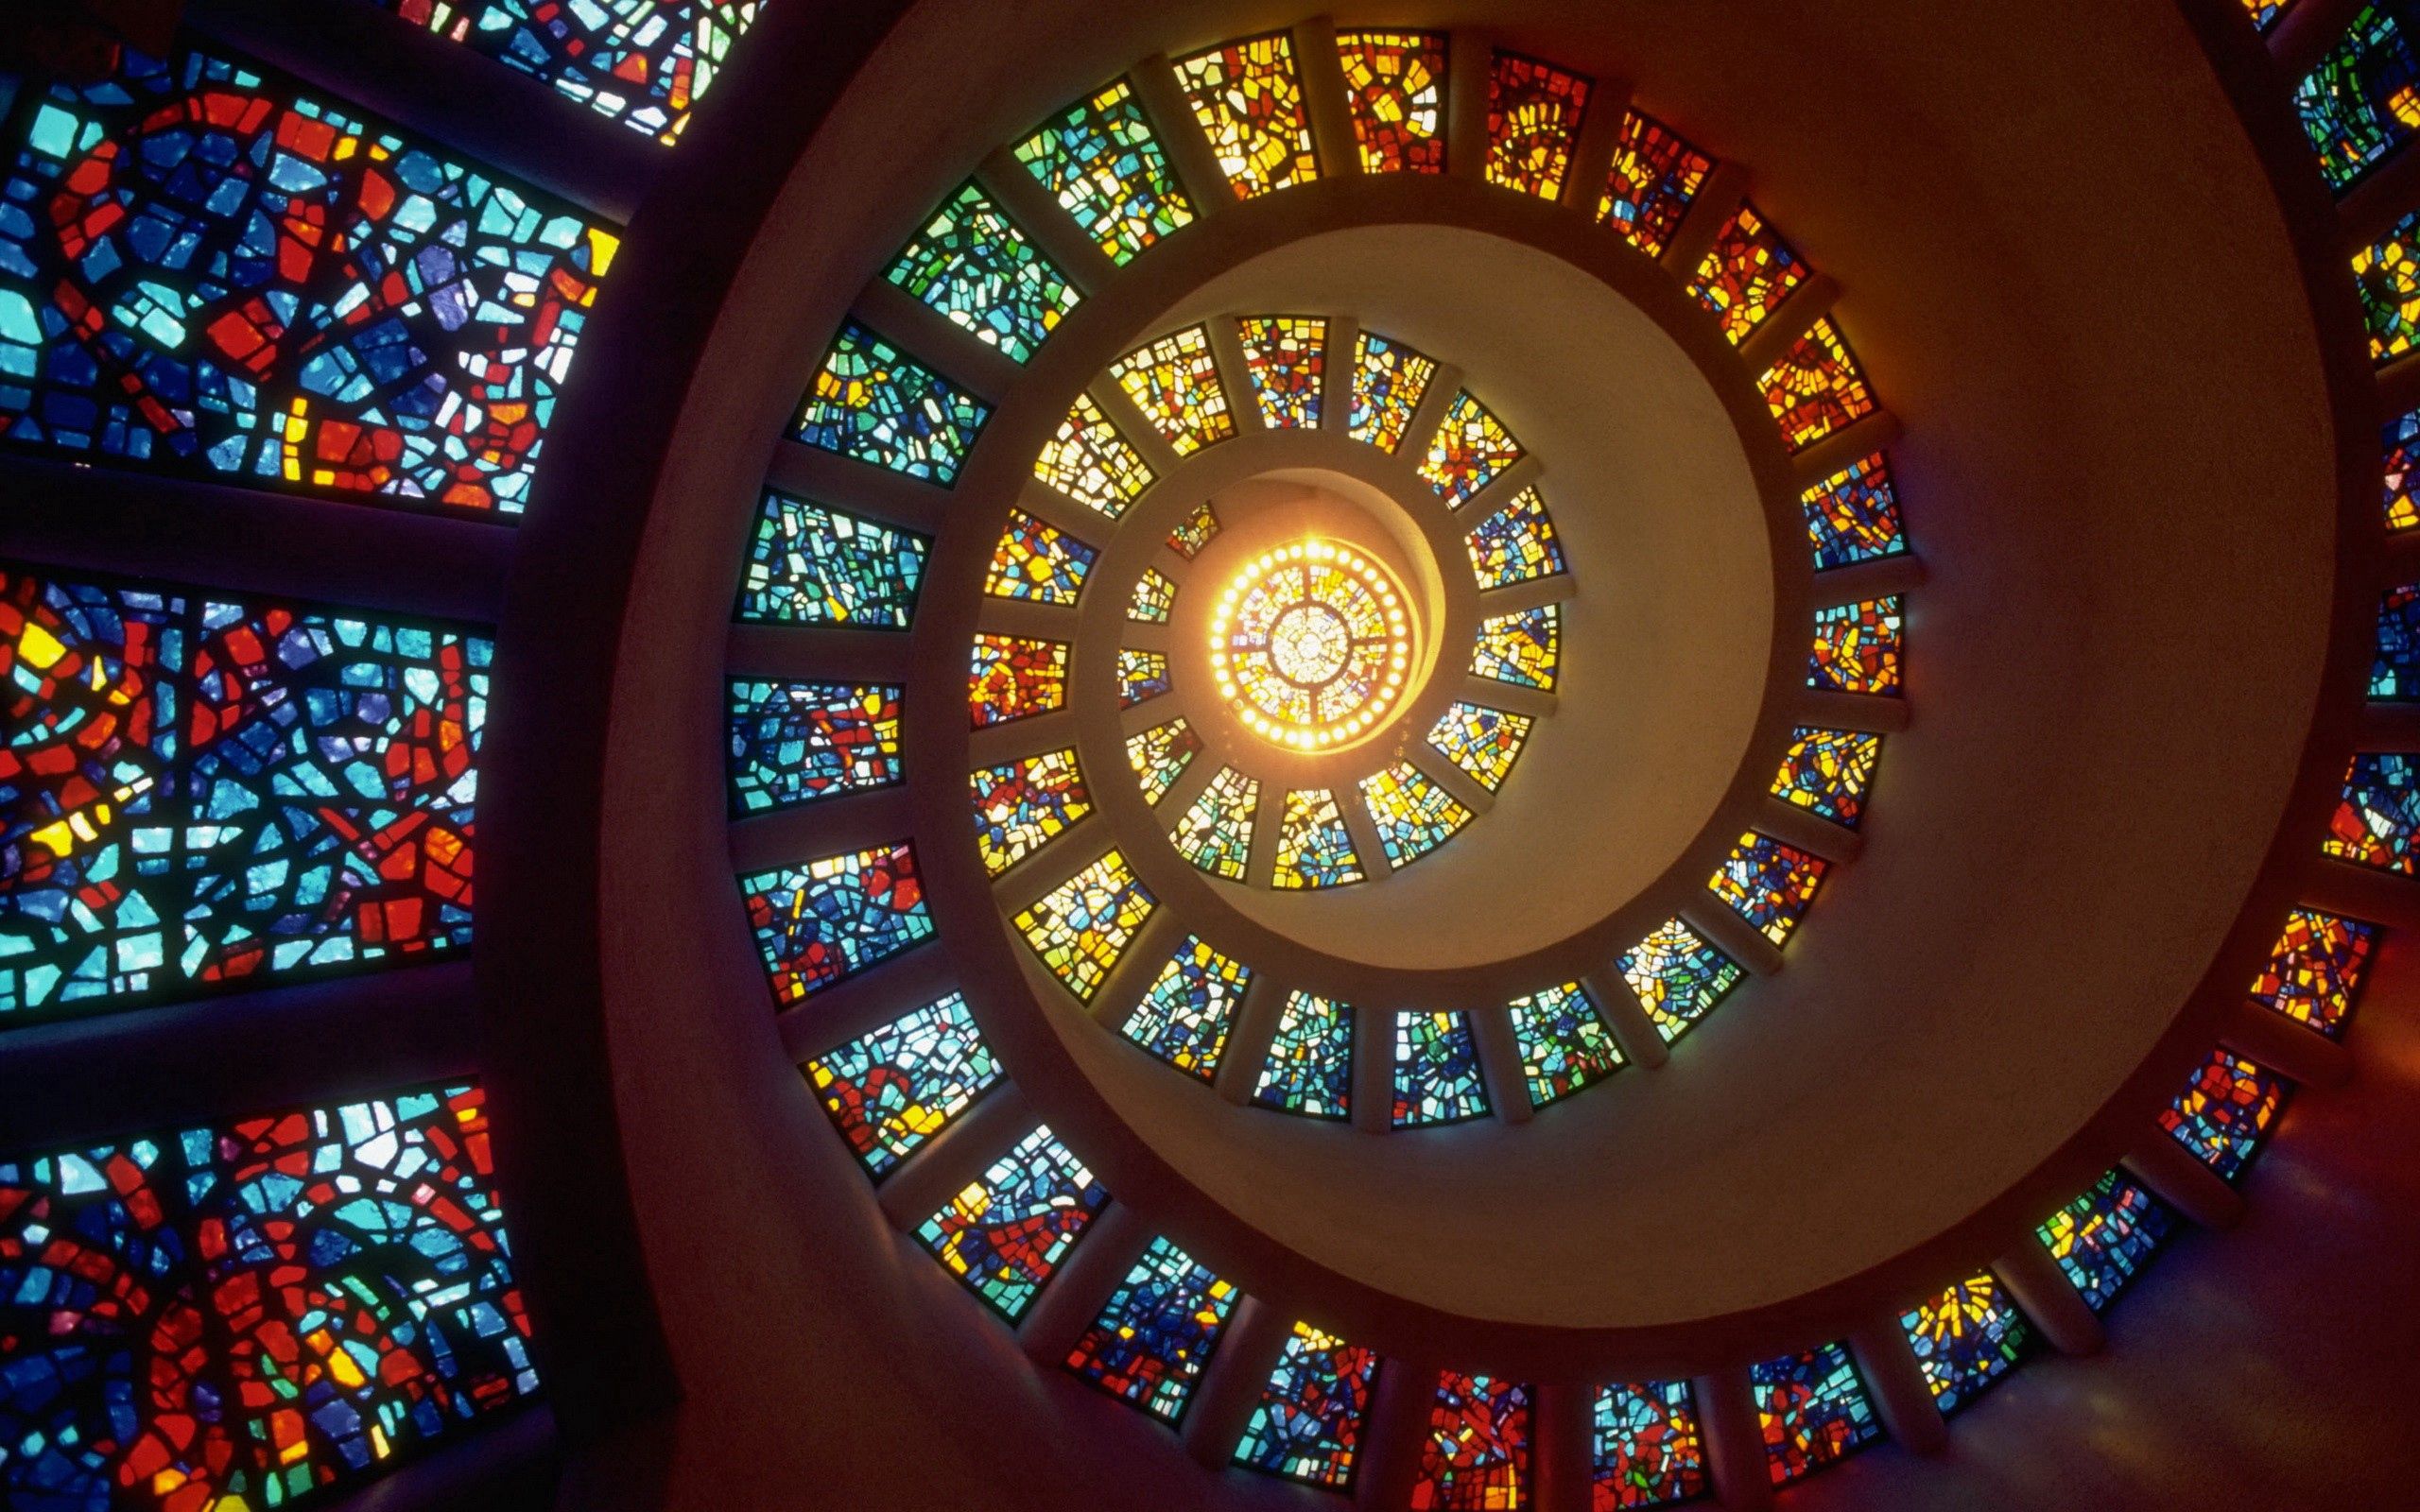 stained glass, abstract, windows, shine, light, spiral, curtain walls